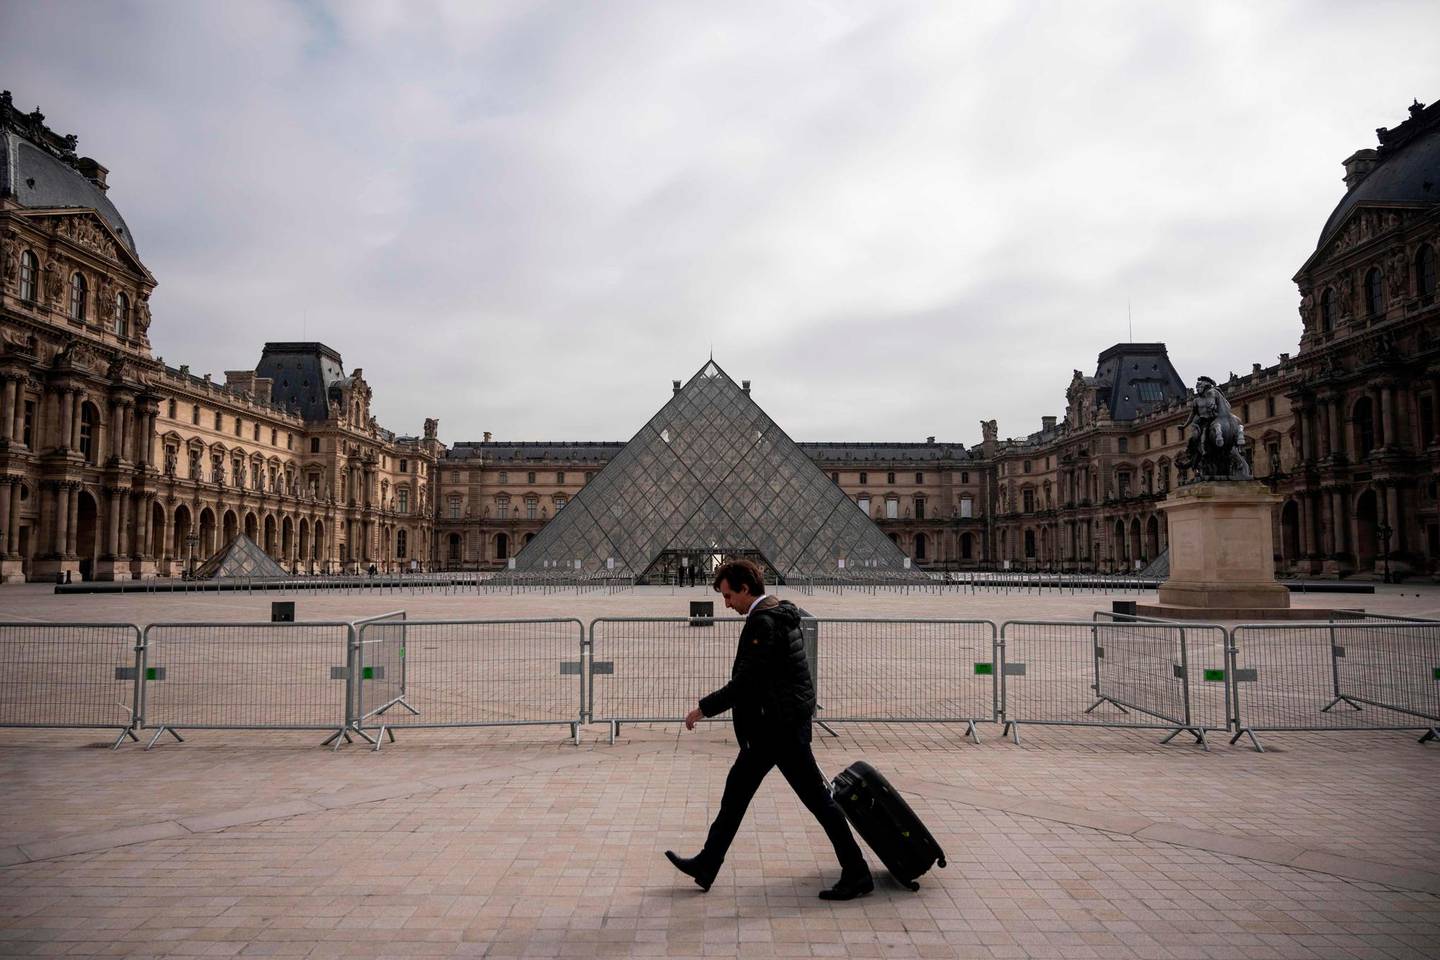 A man walks past the empty square at the Louvre Pyramid in Paris, on March on 17, 2020, while a strict lockdown comes into in effect in France to stop the spread of COVID-19, caused by the novel coronavirus. - A strict lockdown requiring most people in France to remain at home came into effect at midday on March 17, 2020, prohibiting all but essential outings in a bid to curb the coronavirus spread. The government has said tens of thousands of police will be patrolling streets and issuing fines of 38 to 135 euros (42-150 USD) for people without a written declaration justifying their reasons for being out. (Photo by Lionel BONAVENTURE / AFP)